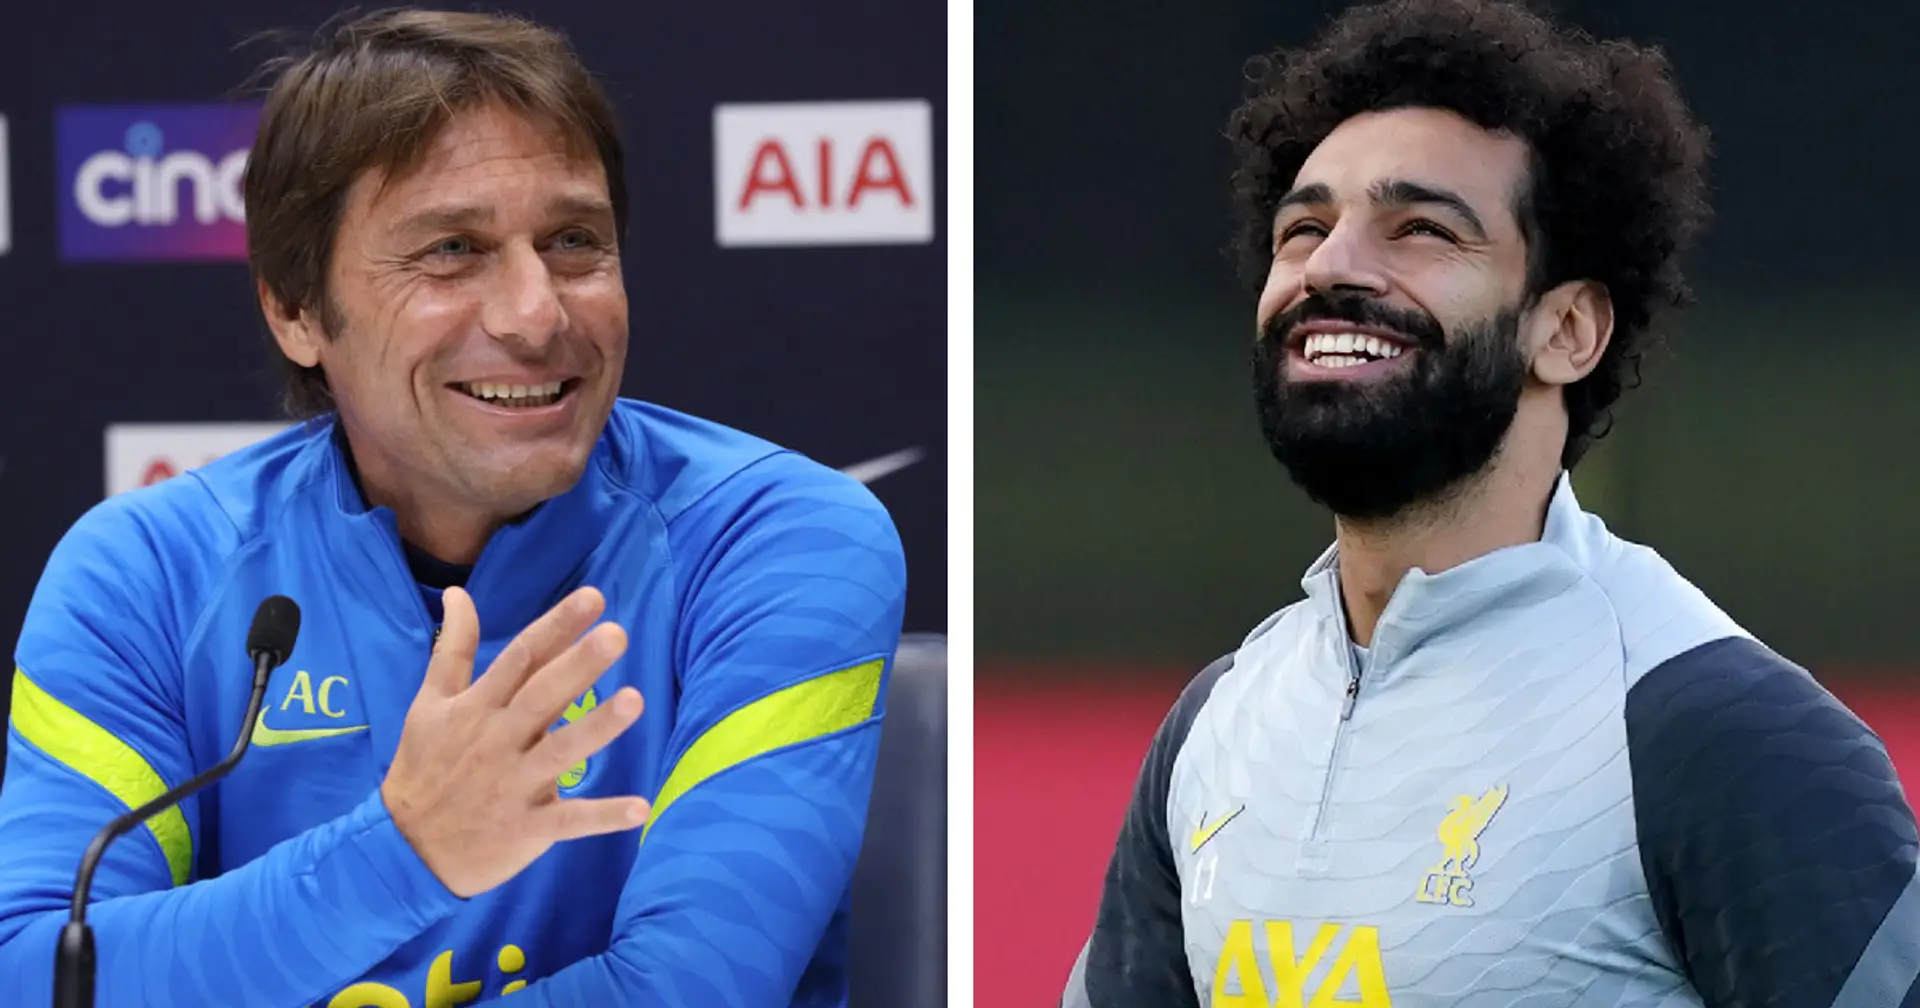 'He's is one of the best in the world, he's improved a lot': Conte heaps praise on Salah ahead of Spurs game